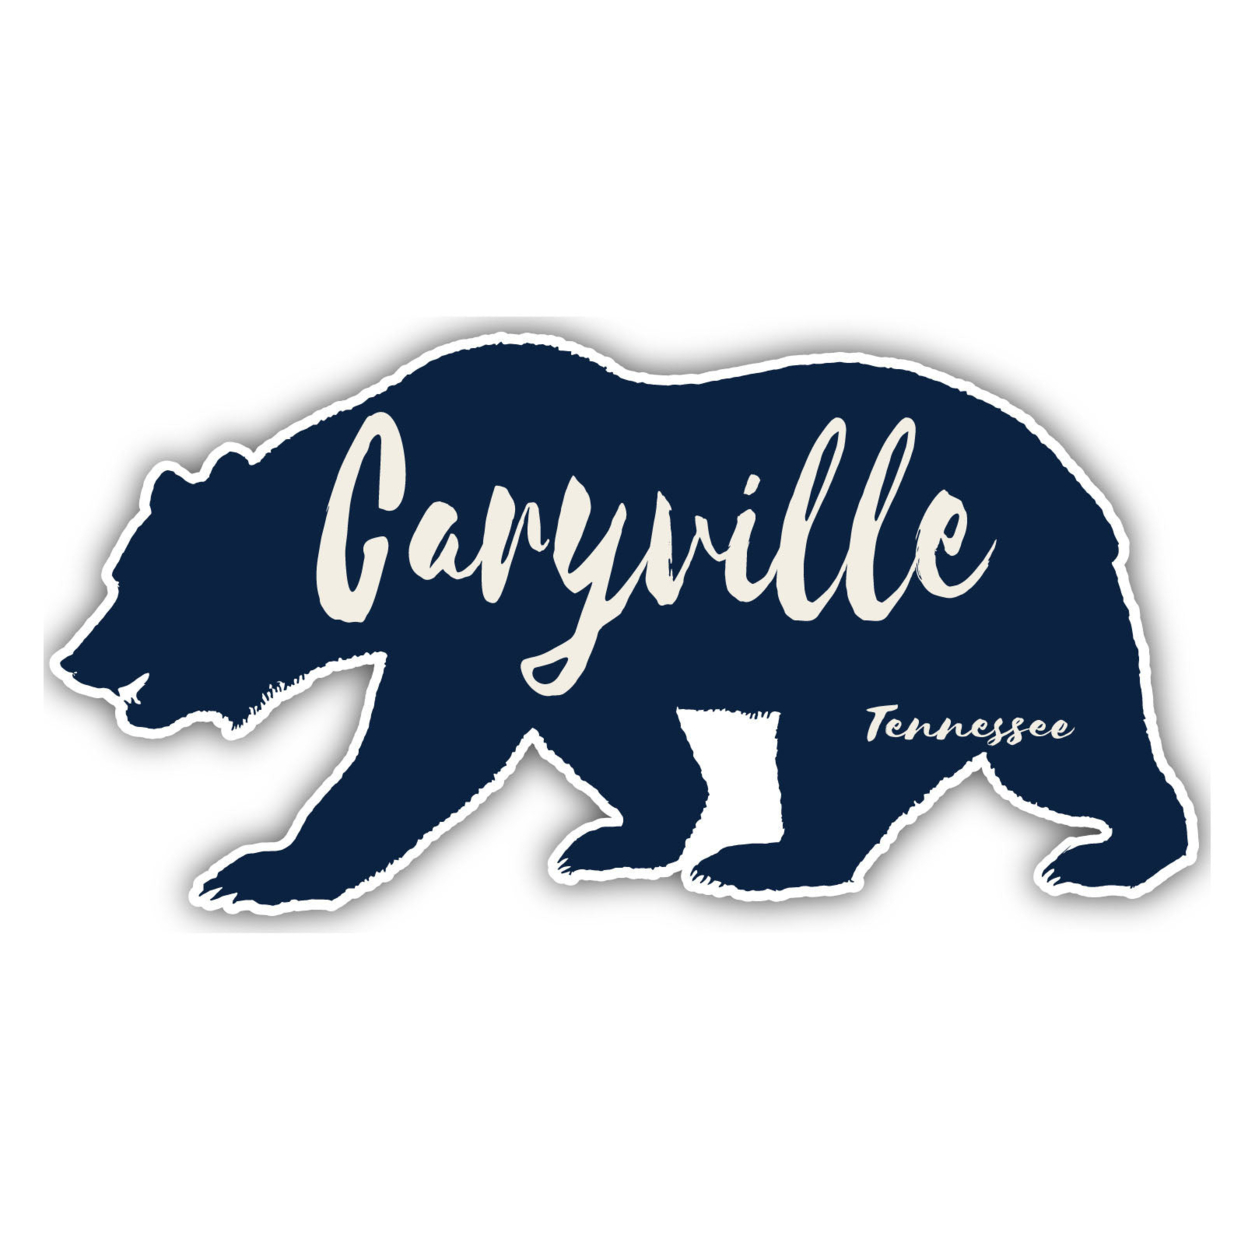 Caryville Tennessee Souvenir Decorative Stickers (Choose Theme And Size) - 4-Pack, 10-Inch, Bear